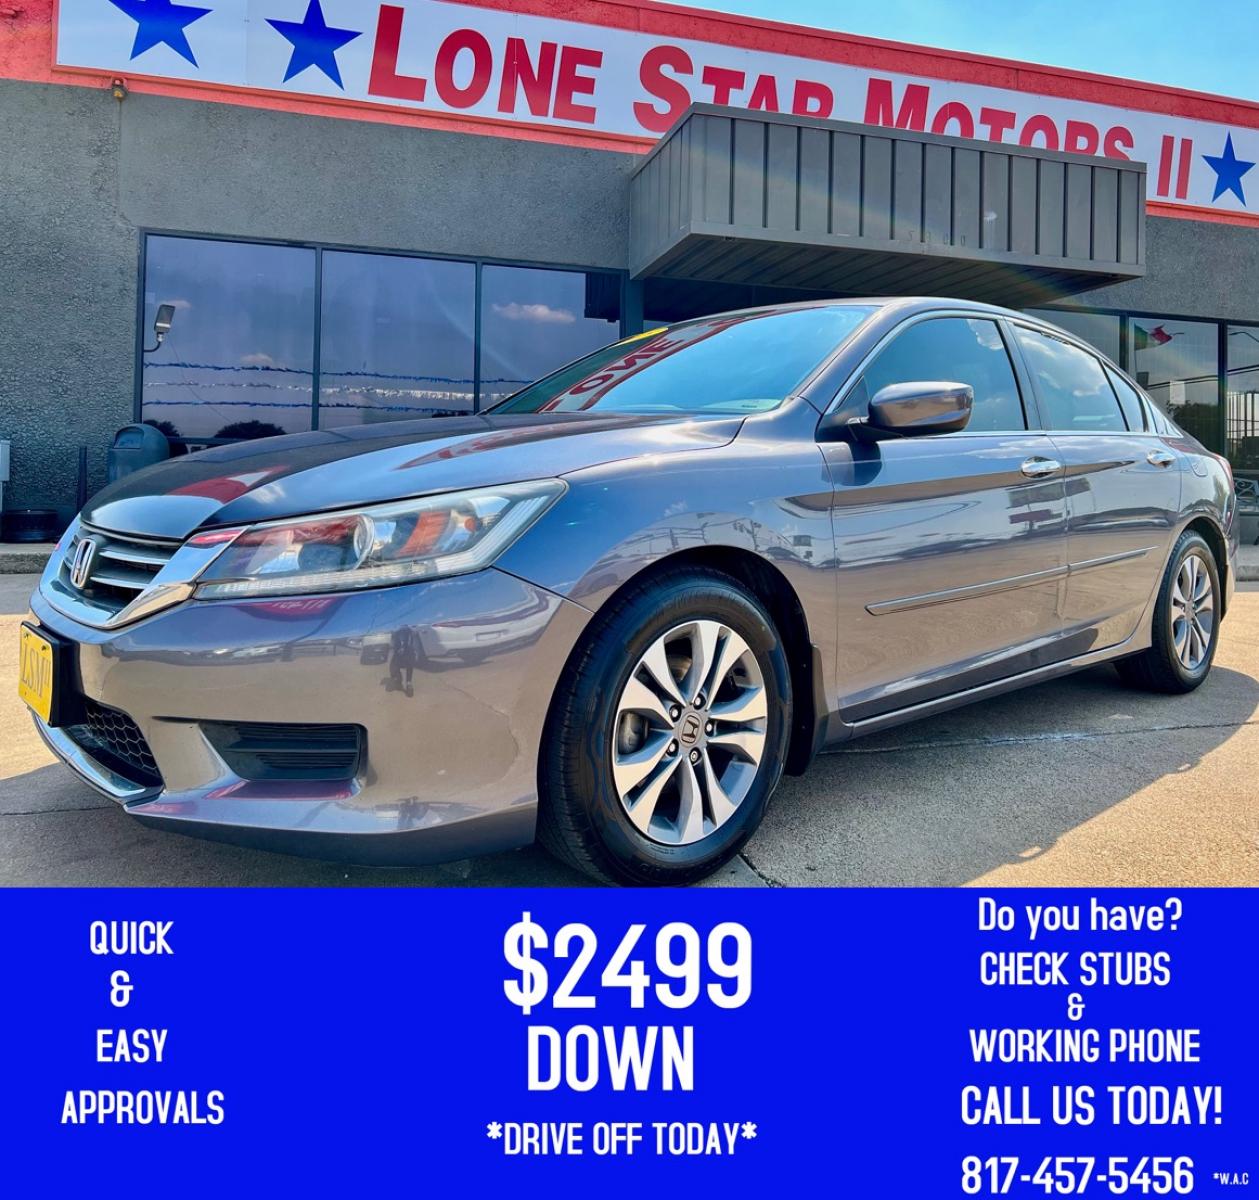 2015 SILVER HONDA ACCORD (1HGCR2F36FA) , located at 5900 E. Lancaster Ave., Fort Worth, TX, 76112, (817) 457-5456, 0.000000, 0.000000 - This is a 2015 HONDA ACCORD 4 DOOR SEDAN that is in excellent condition. There are no dents or scratches. The interior is clean with no rips or tears or stains. All power windows, door locks and seats. Ice cold AC for those hot Texas summer days. It is equipped with a CD player, AM/FM radio, AUX por - Photo #0